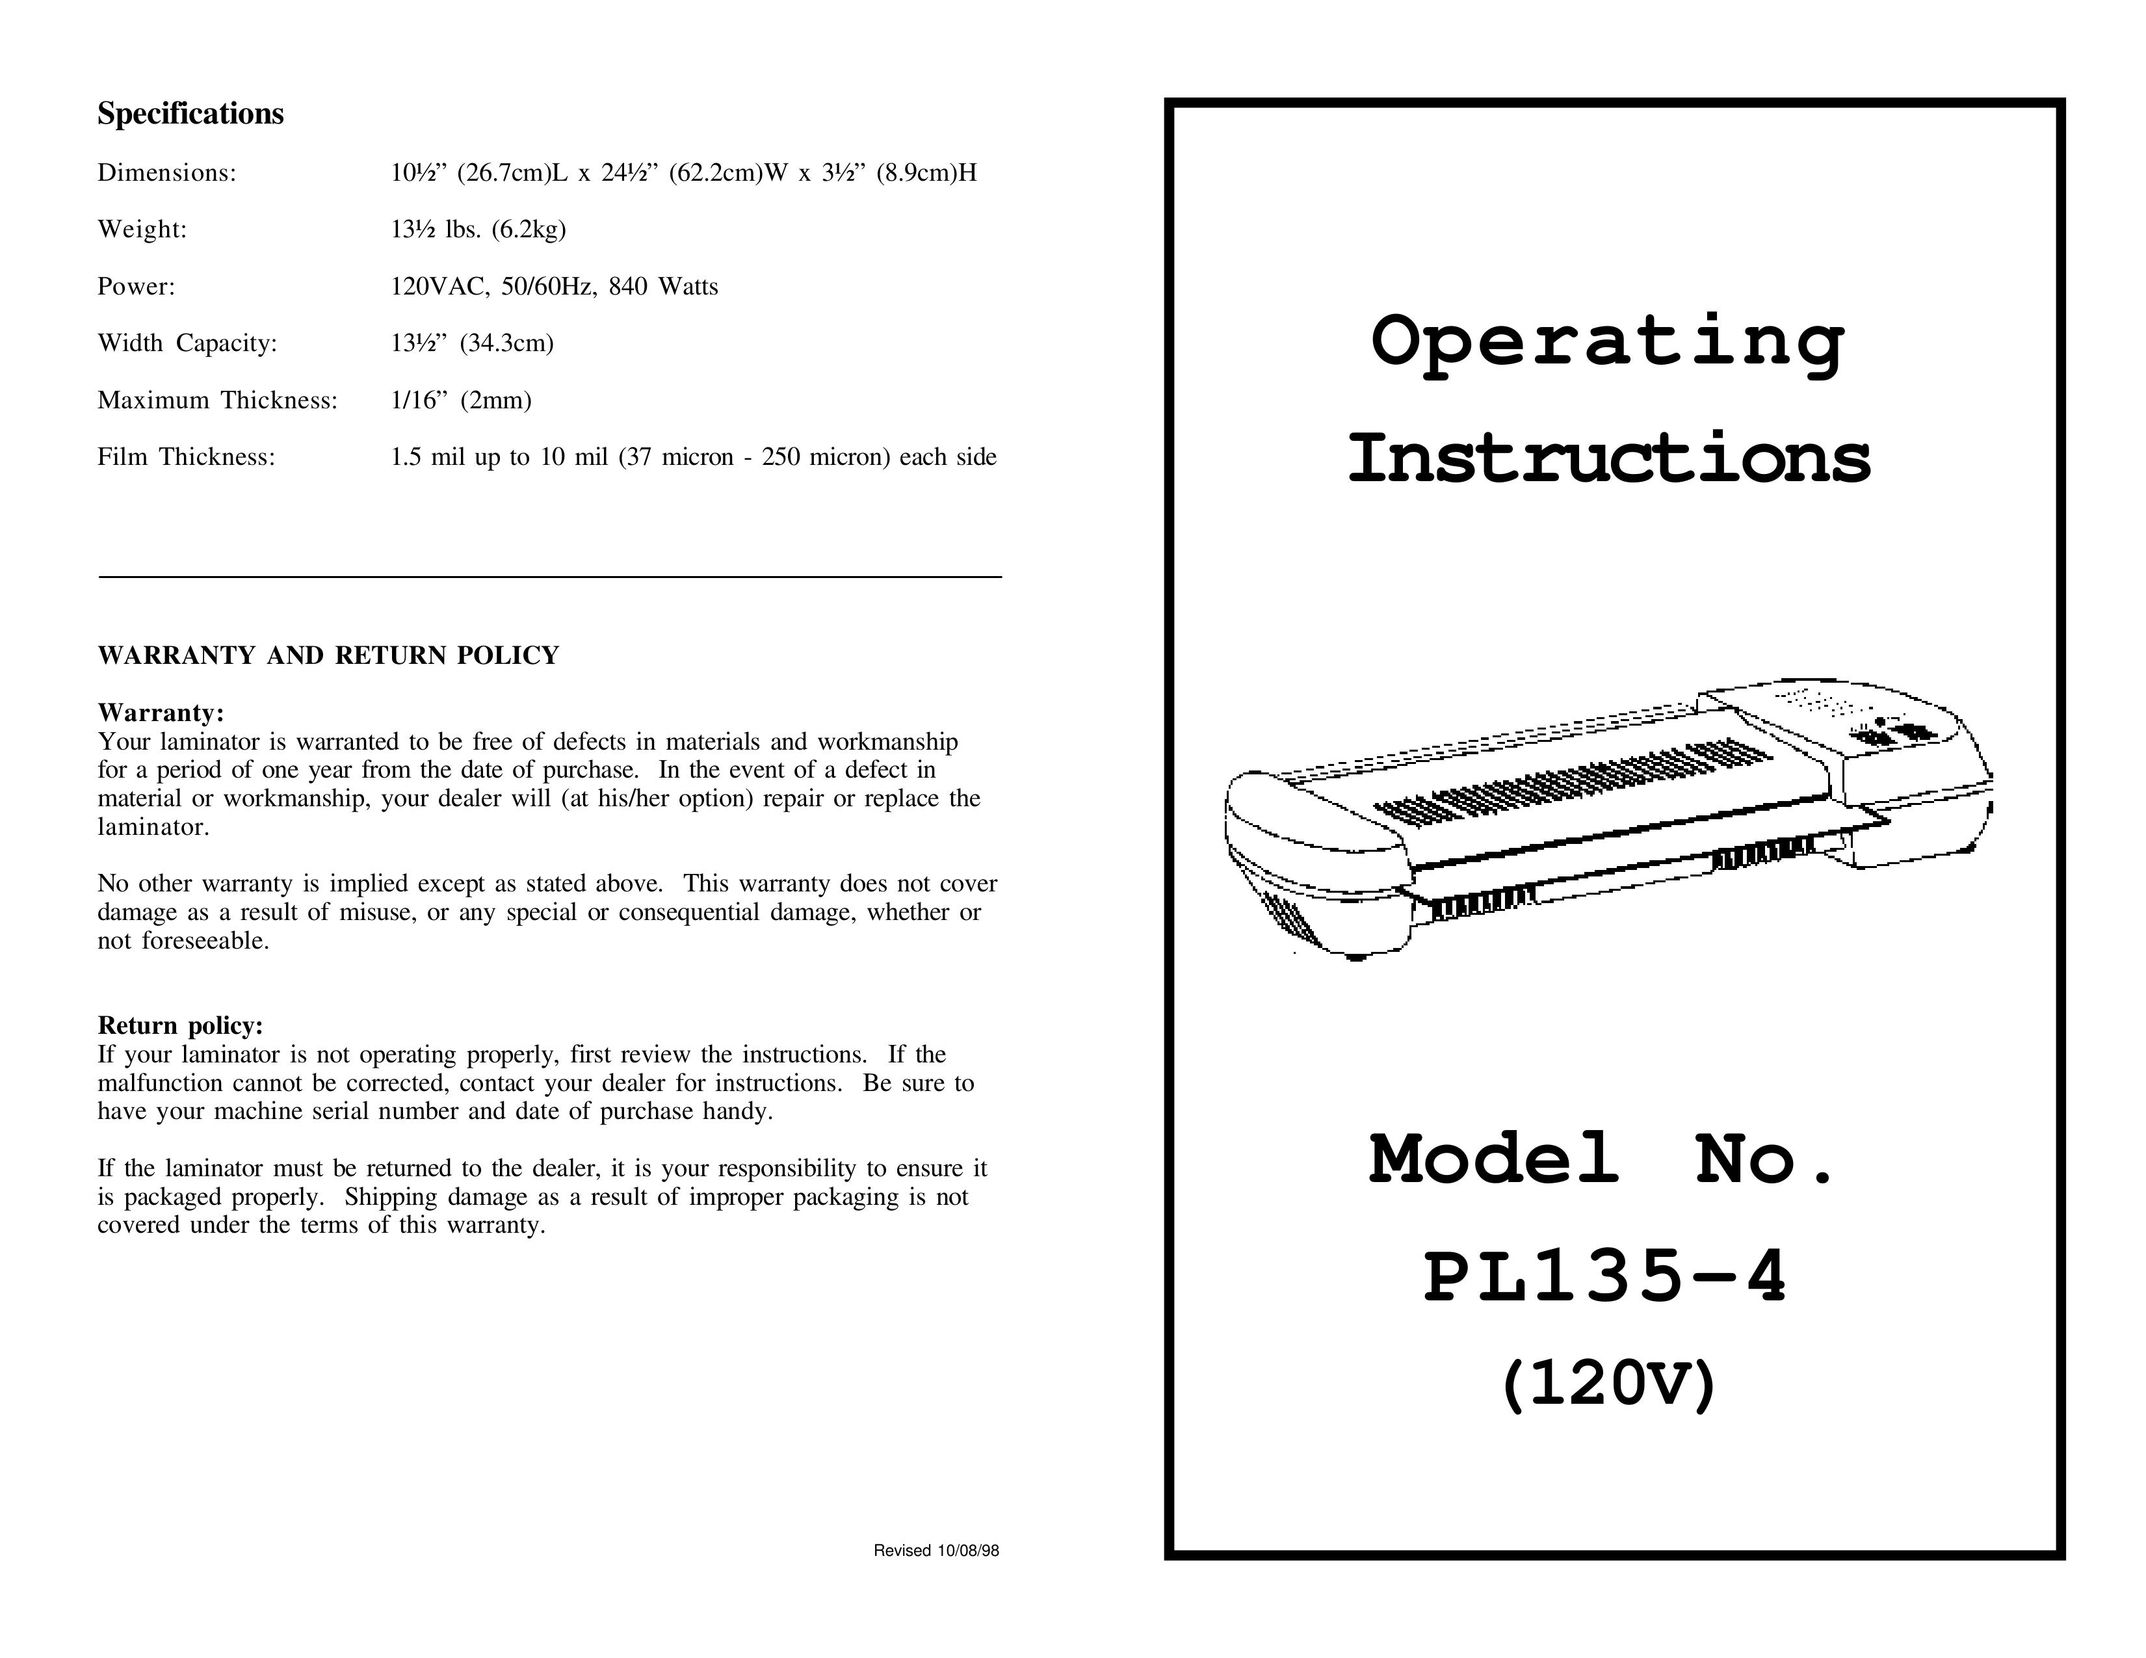 Banner American Products PL135-4 Laminator User Manual